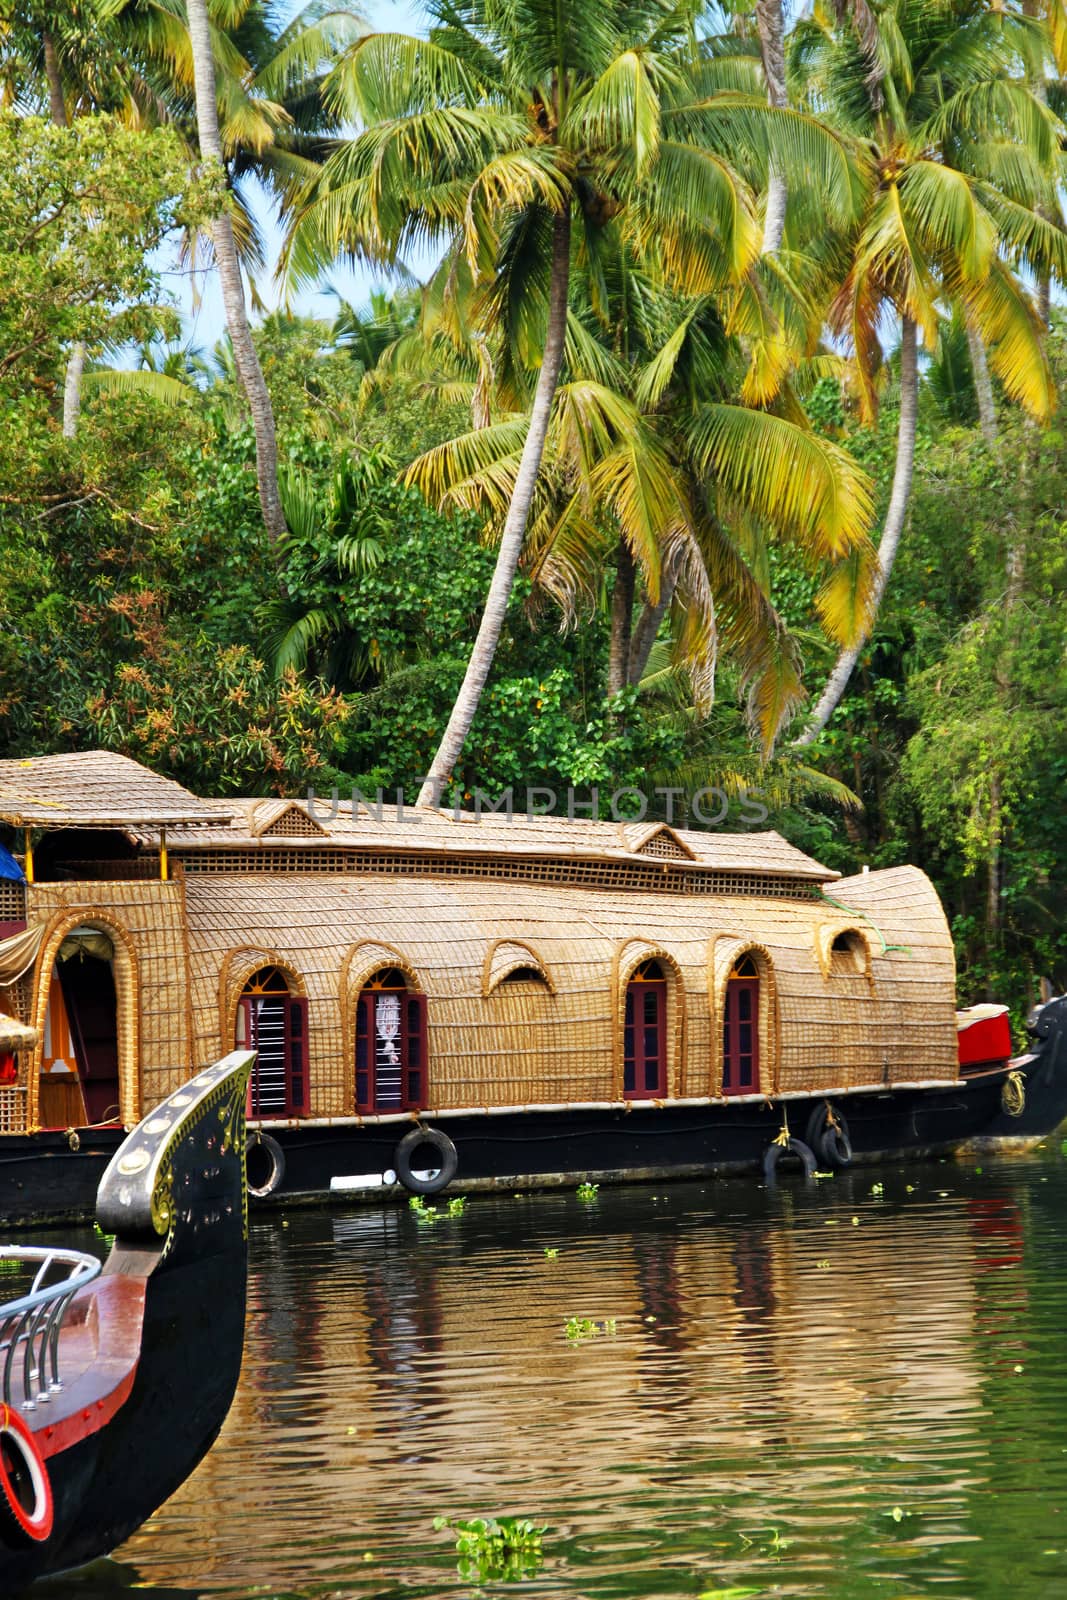 A rice barge turned into tourist house boat slowly cruising in the waters of the Venbanadu lake of Kerala, India